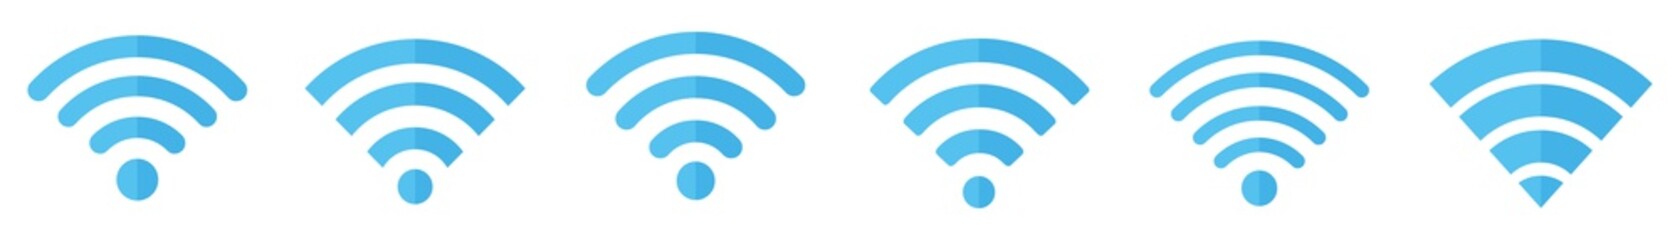 Wireless and wifi icon set. Internet access Connection. Wi-fi signal various shapes symbol. Vector illustration.